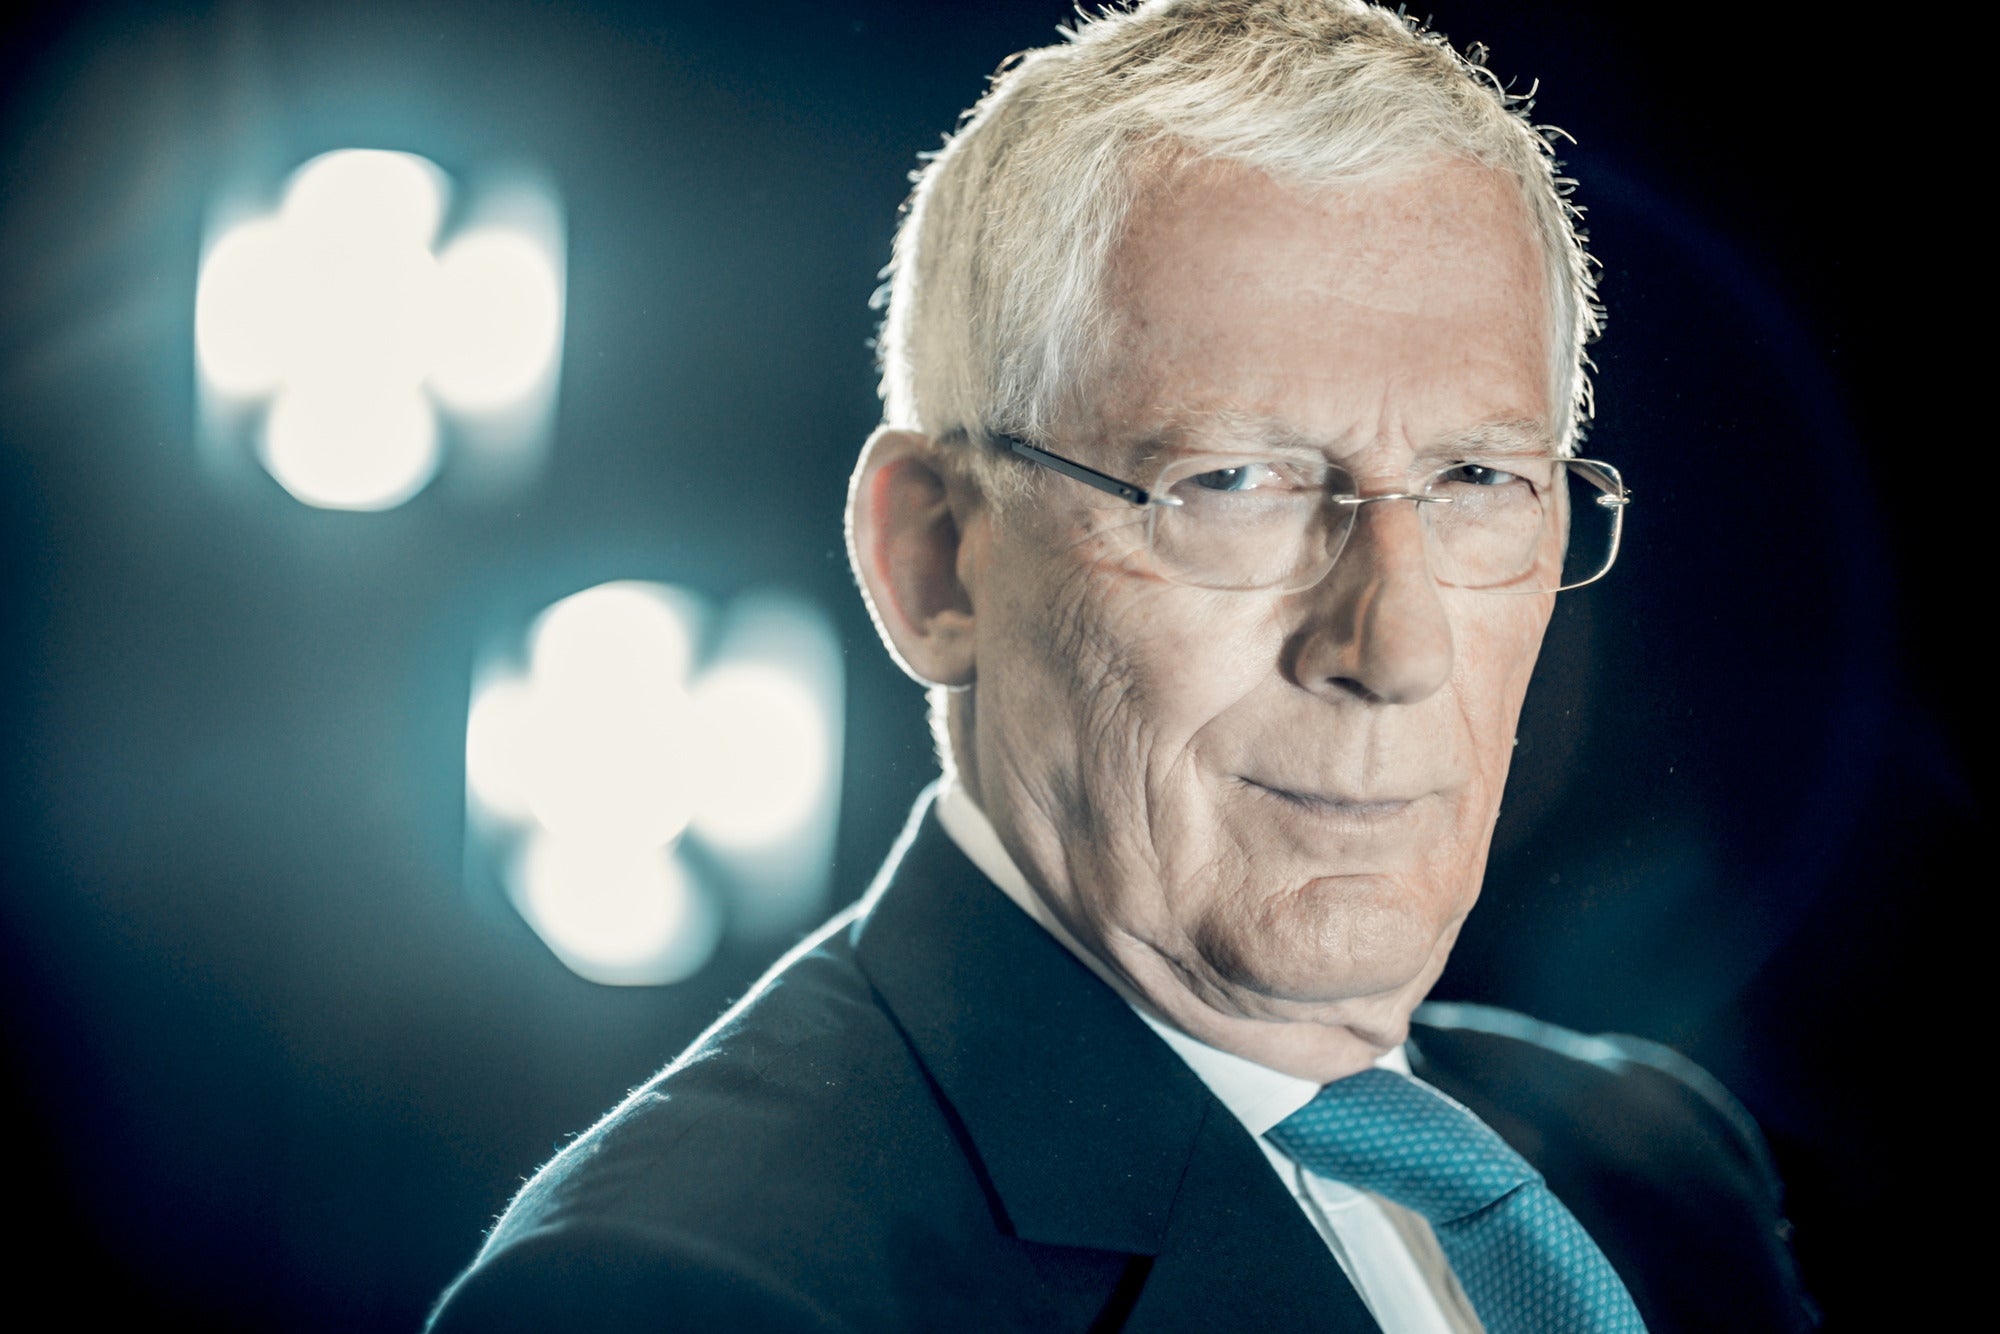 Nick Hewer is to leave The Apprentice after 10 years